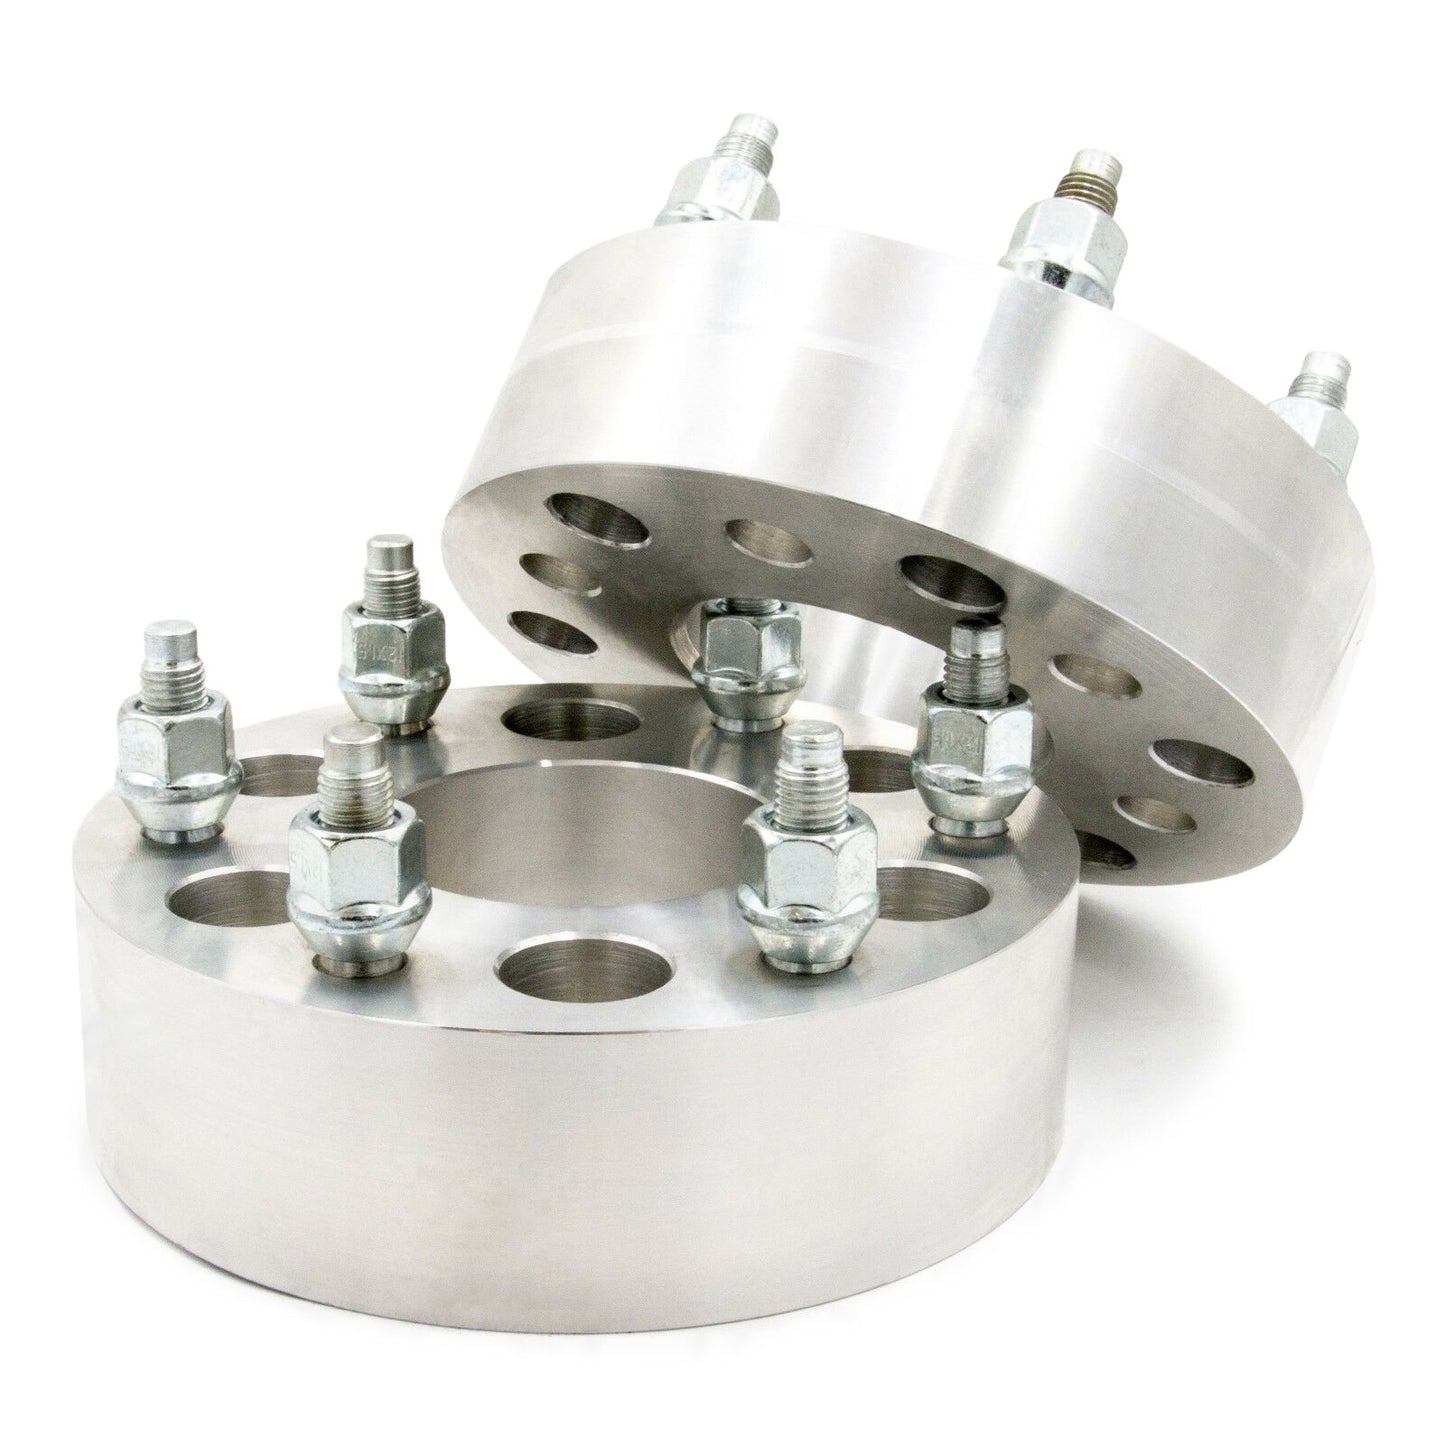 6x5" to 6x5" Wheel Spacer/Adapter - Thickness: 3/4"- 4"